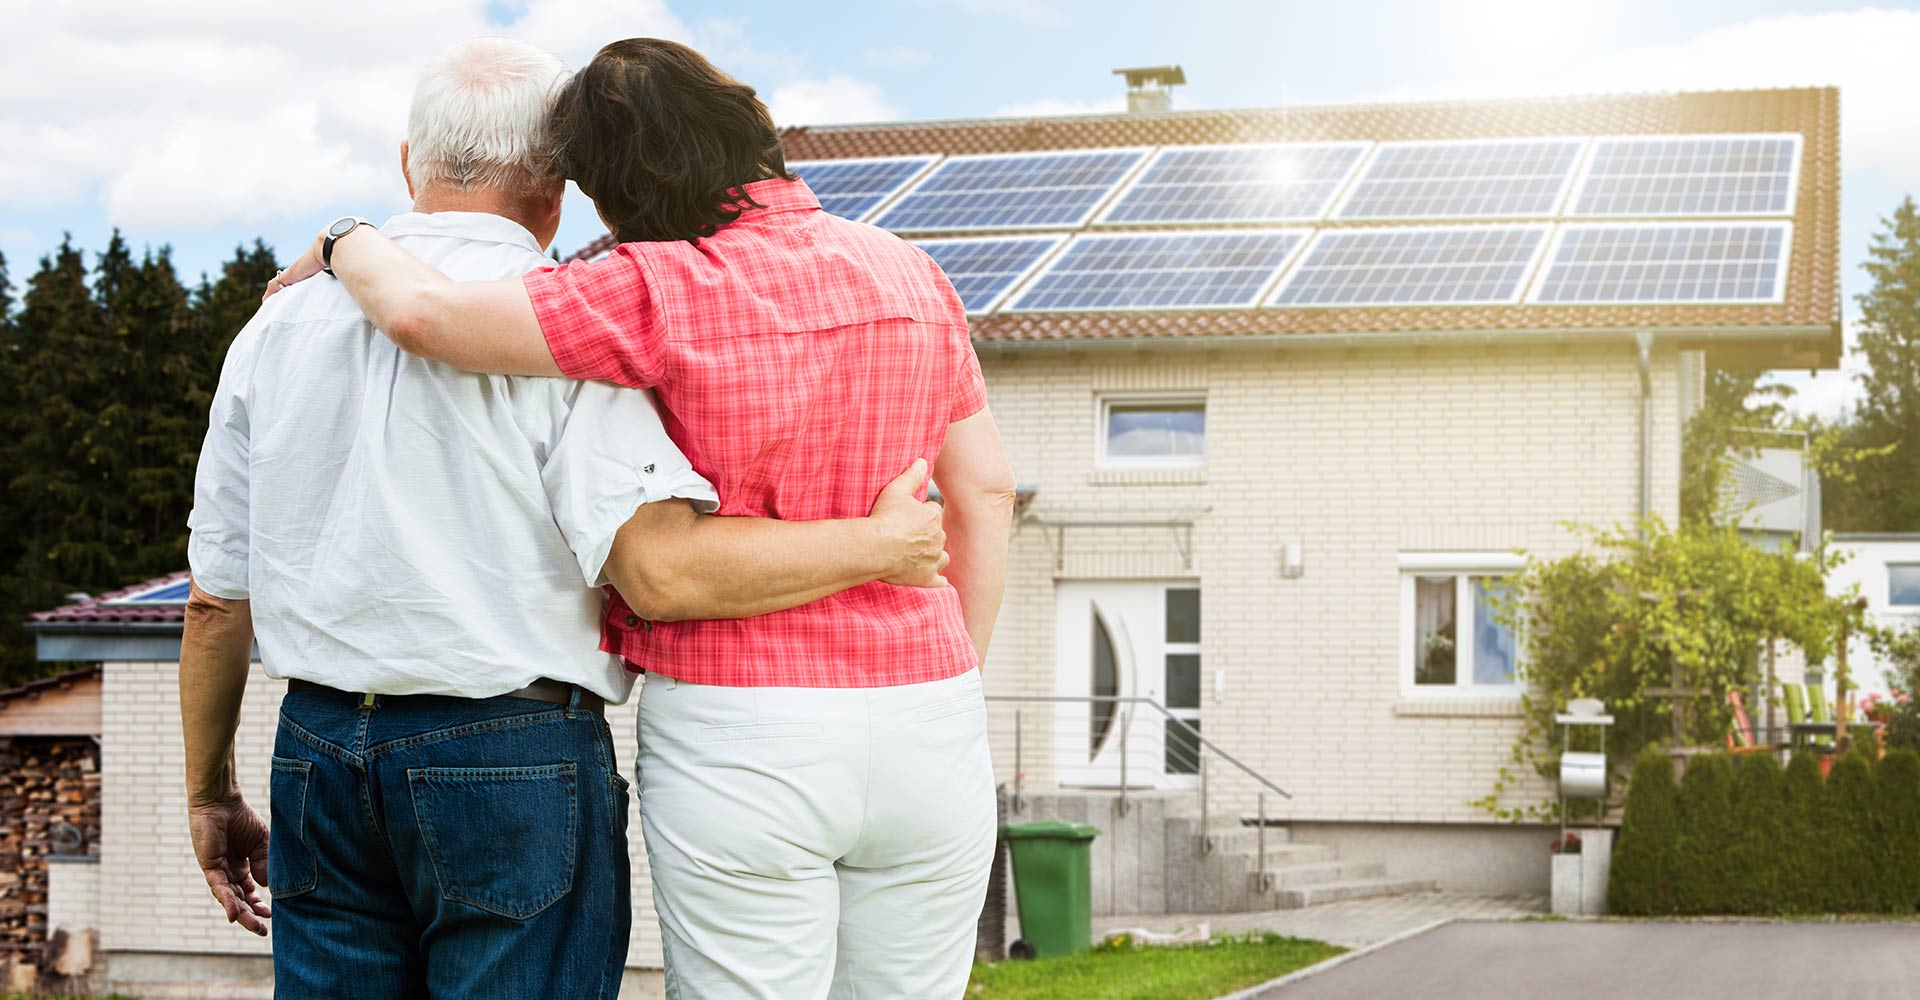 A happy older couple stands on their driveway and views their newly financed, roof-mounted solar project.